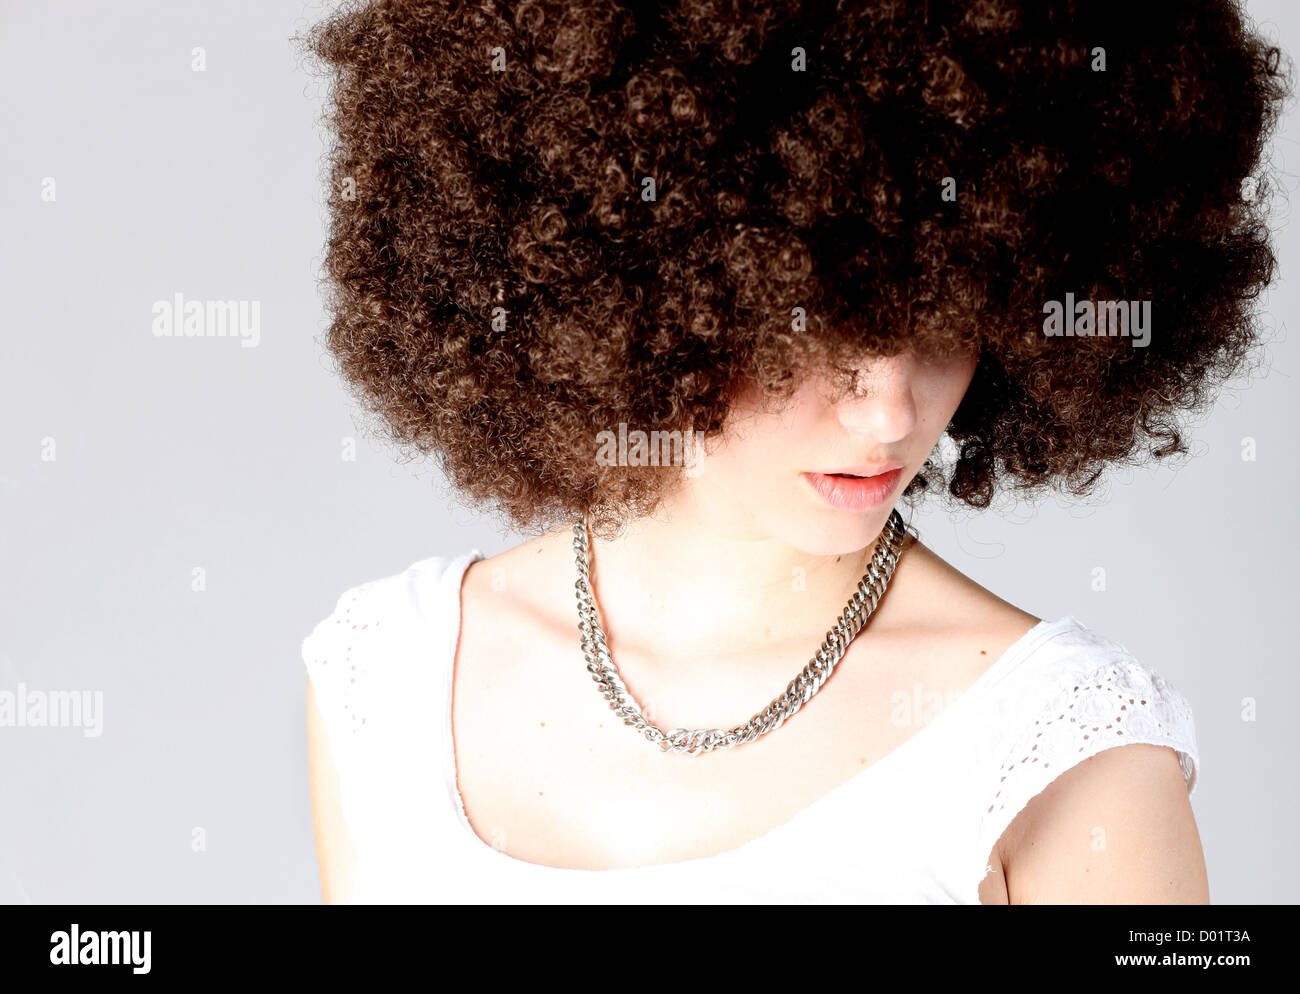 Young woman wearing a wig against gray background Stock Photo